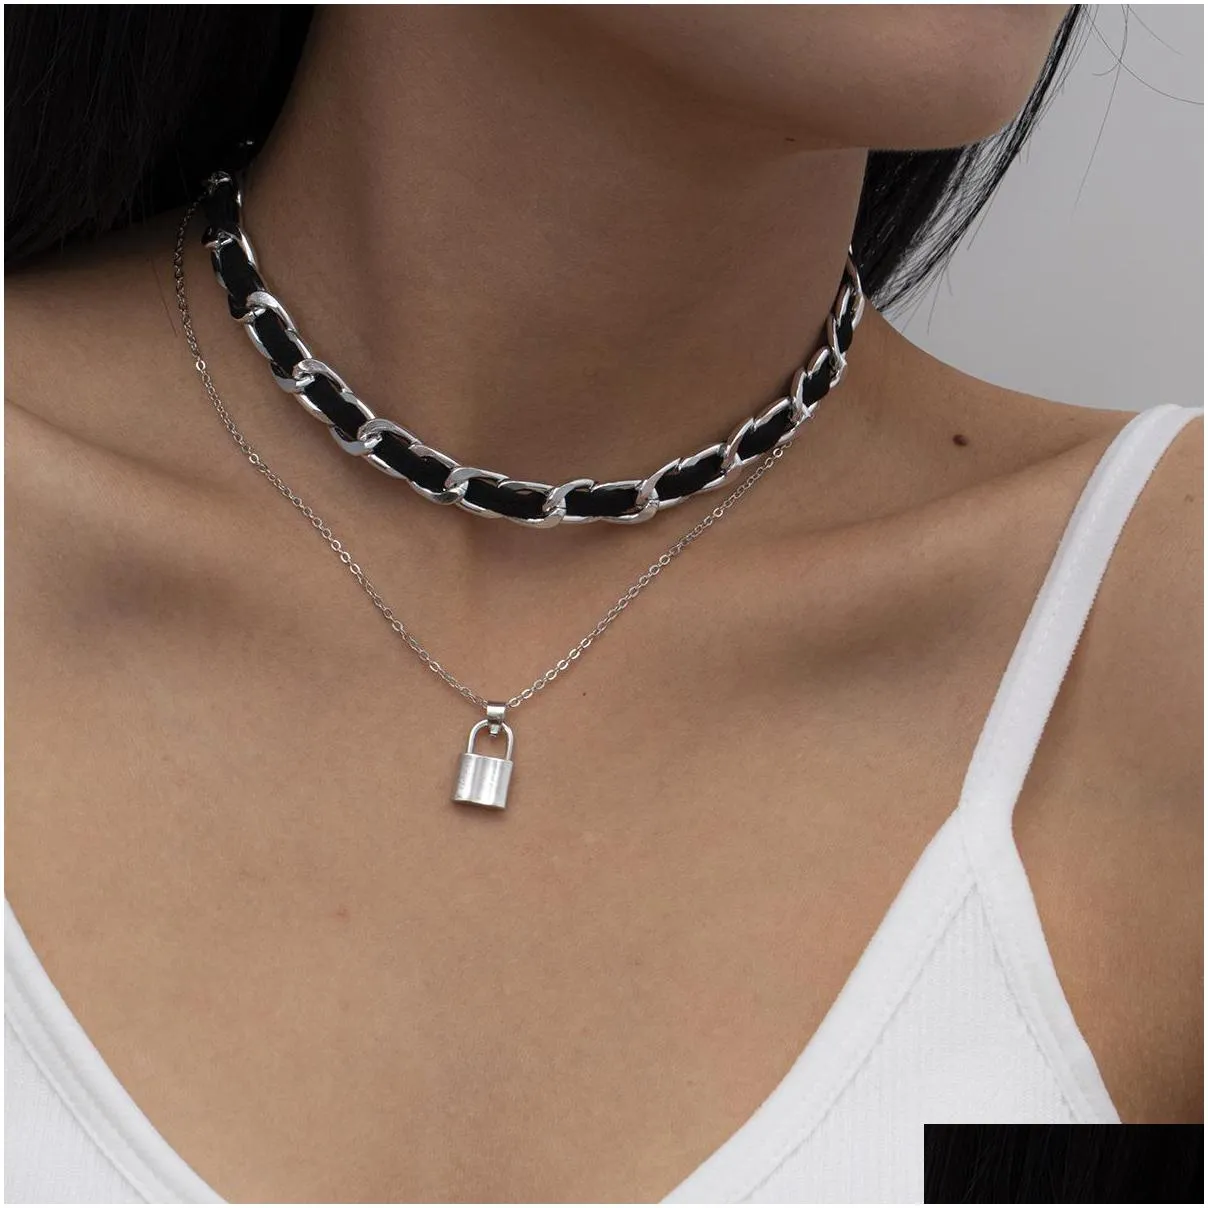 Pendant Necklaces Gold Chains Lock Pendant Necklace Lace Mti Layer Wrap Choker Necklaces Women Fashion Jewelry Will And Sandy Gift Jew Dhgan